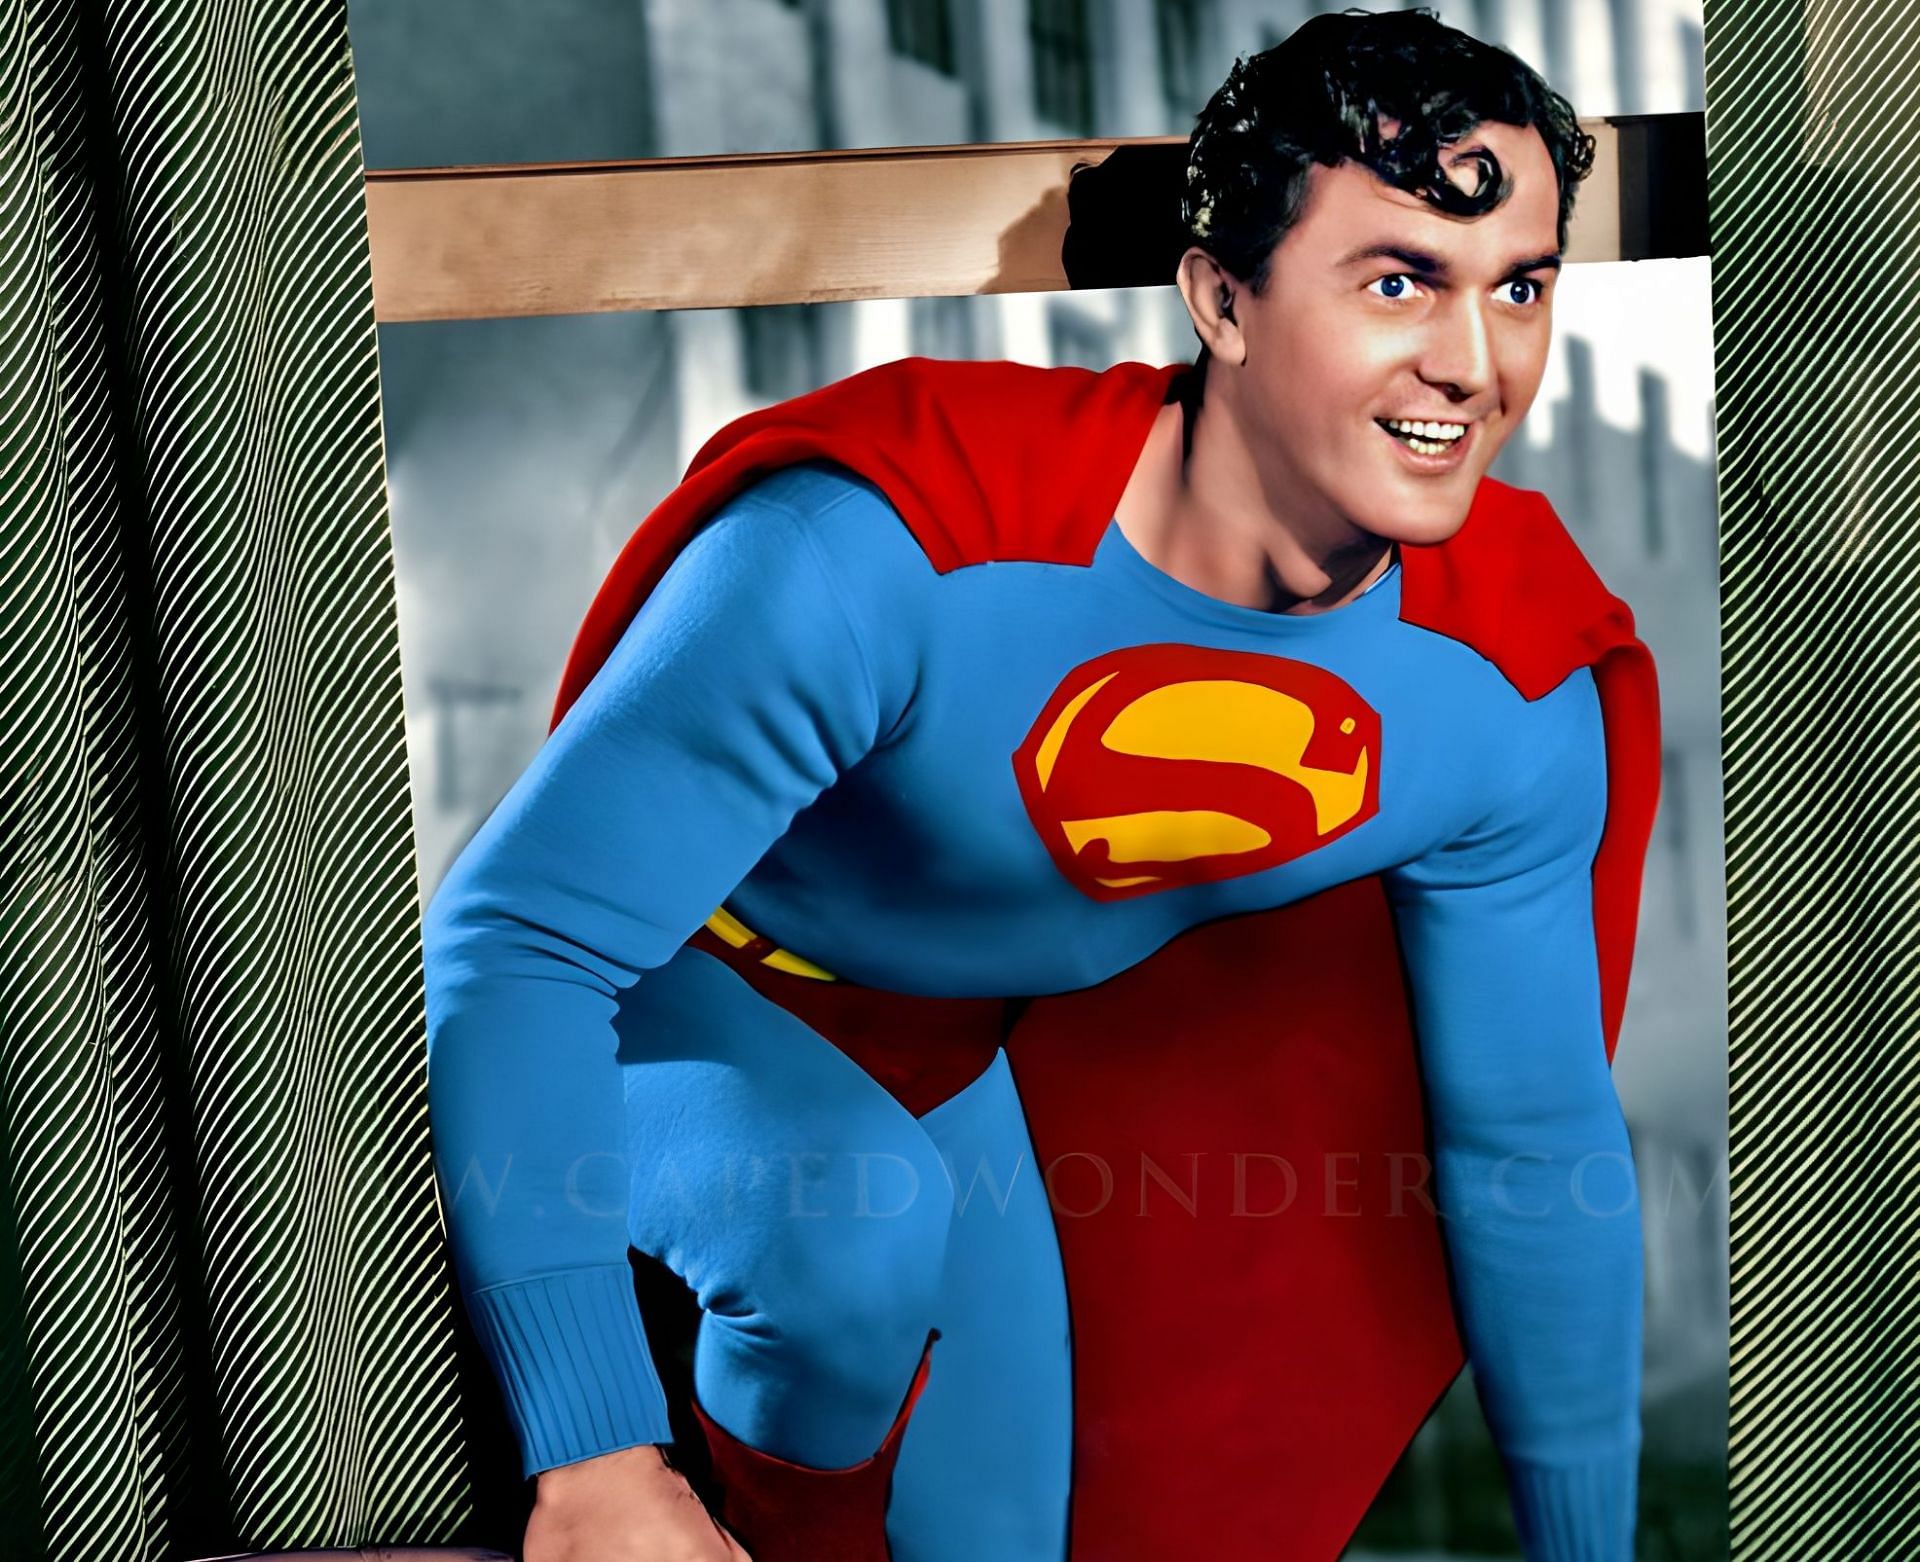 Kirk Alyn&#039;s Superman costume in the 1948 film series was the first live-action interpretation of the character.(Image via Sportskeeda)